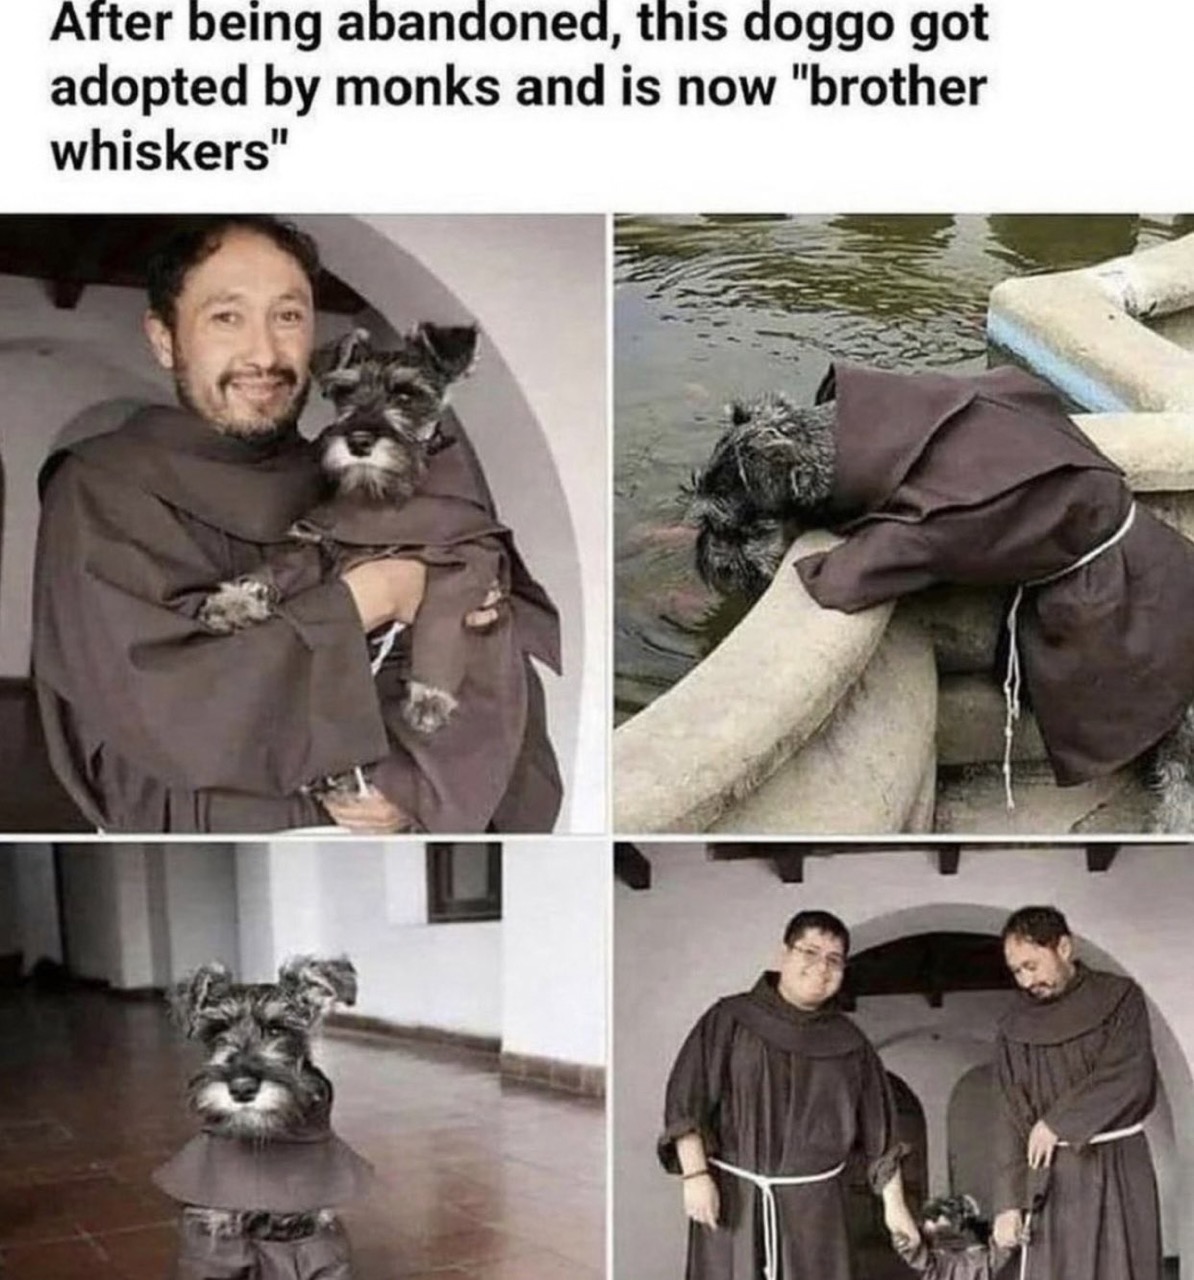 dudes post wins - brother whiskers monk - After being abandoned, this doggo got adopted by monks and is now "brother whiskers"